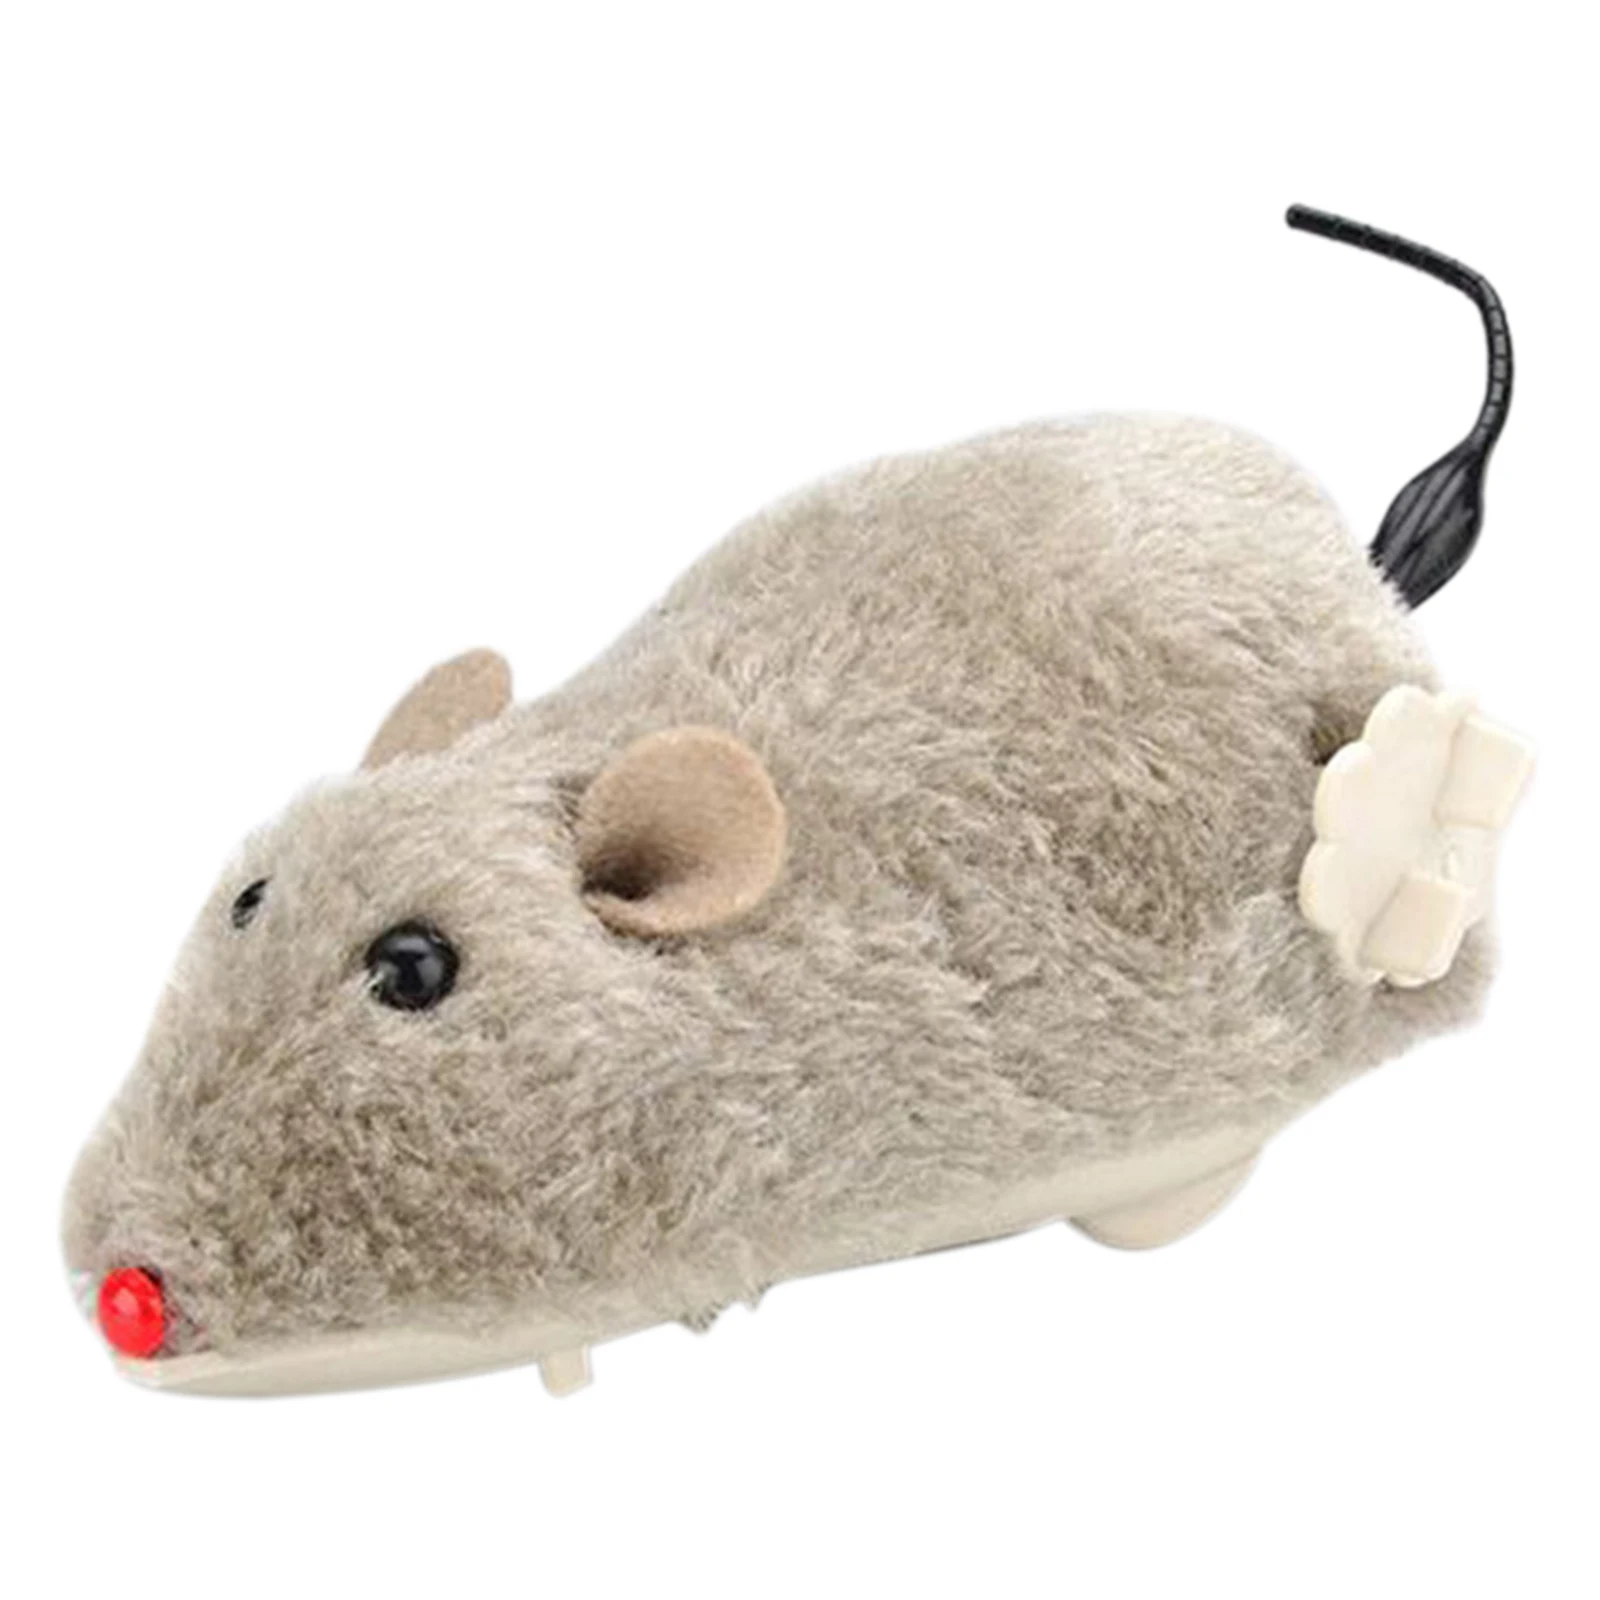 Wireless Plush Mouse Funny Pet Cat Remote Control Fake Simulation Electronic Mice Interactive Mechanical Motion Kitten Rat Toy 